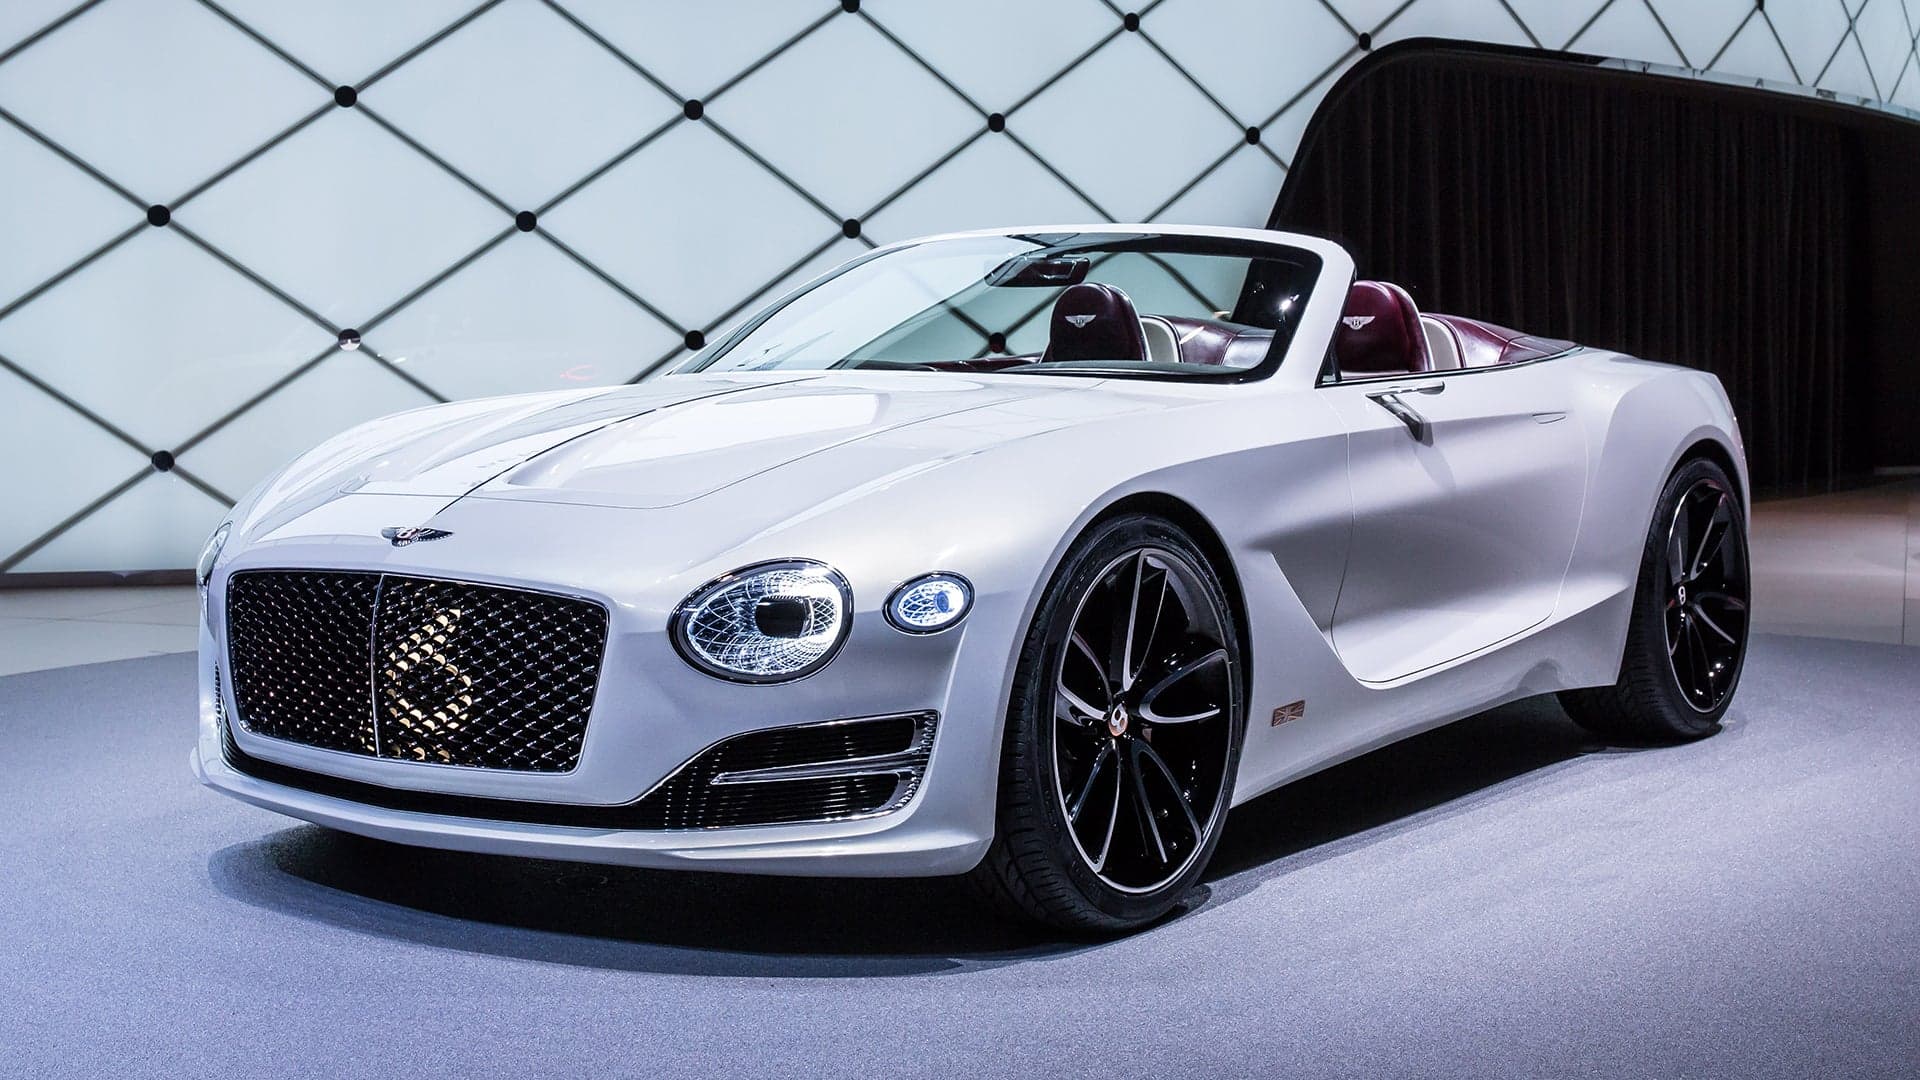 Bentley’s First Electric Vehicle Might Use the Porsche Taycan Platform